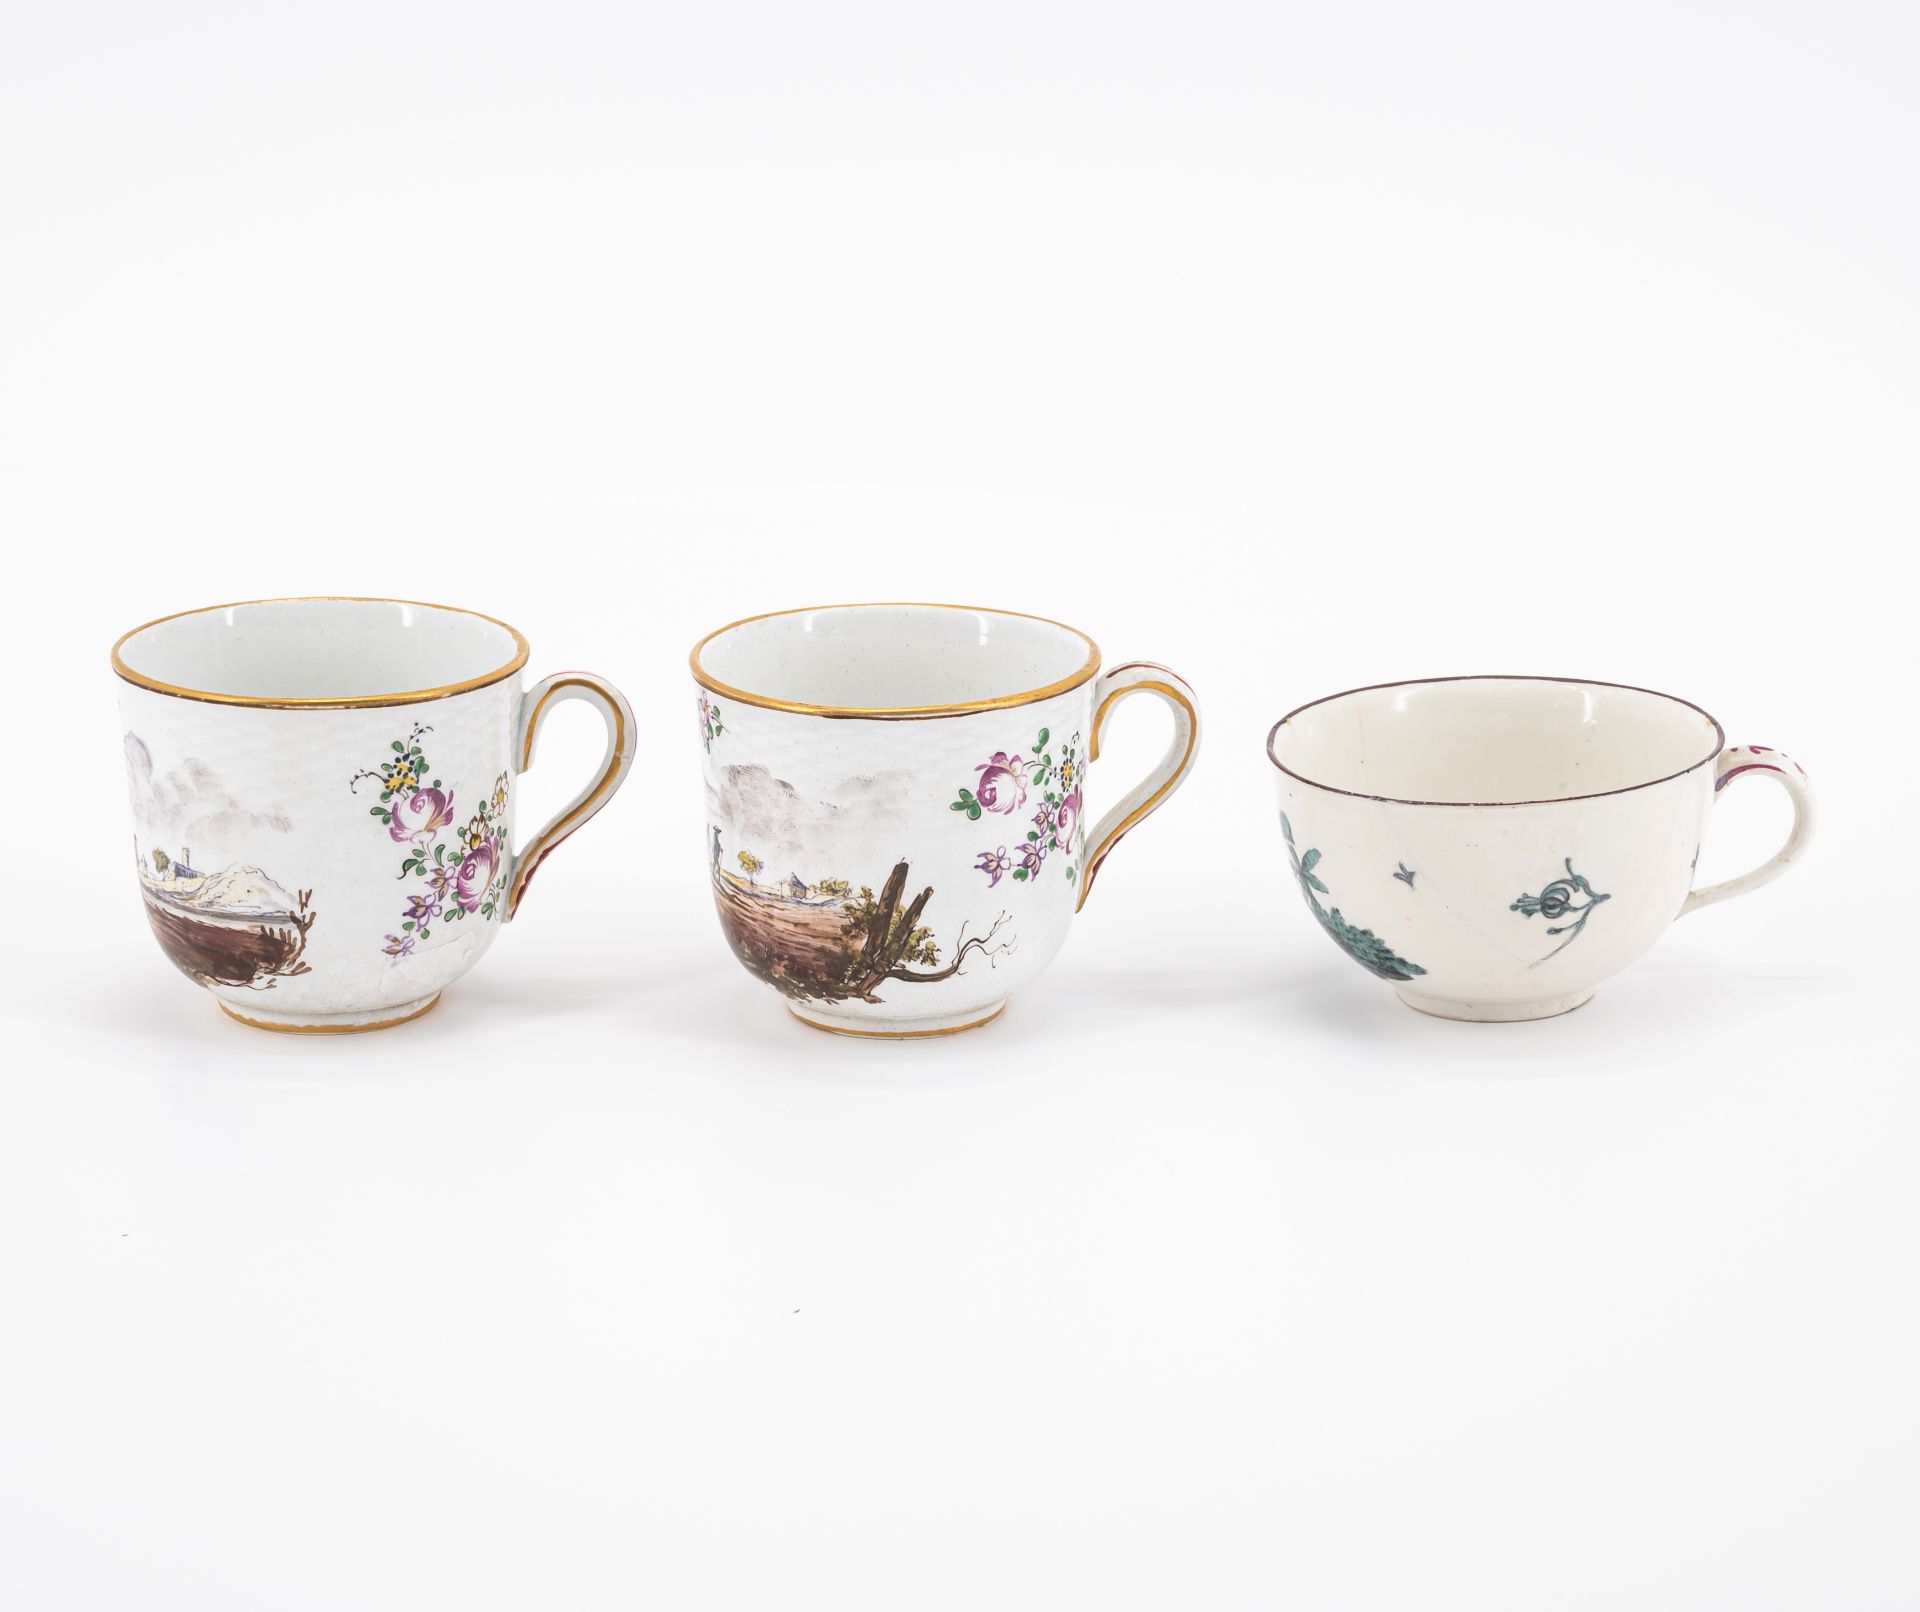 SIX PORCELAIN CUPS AND THREE SAUCERS WITH BIRD DECOR, FLOWERS AND LANDSCAPE SCENES - Image 2 of 16